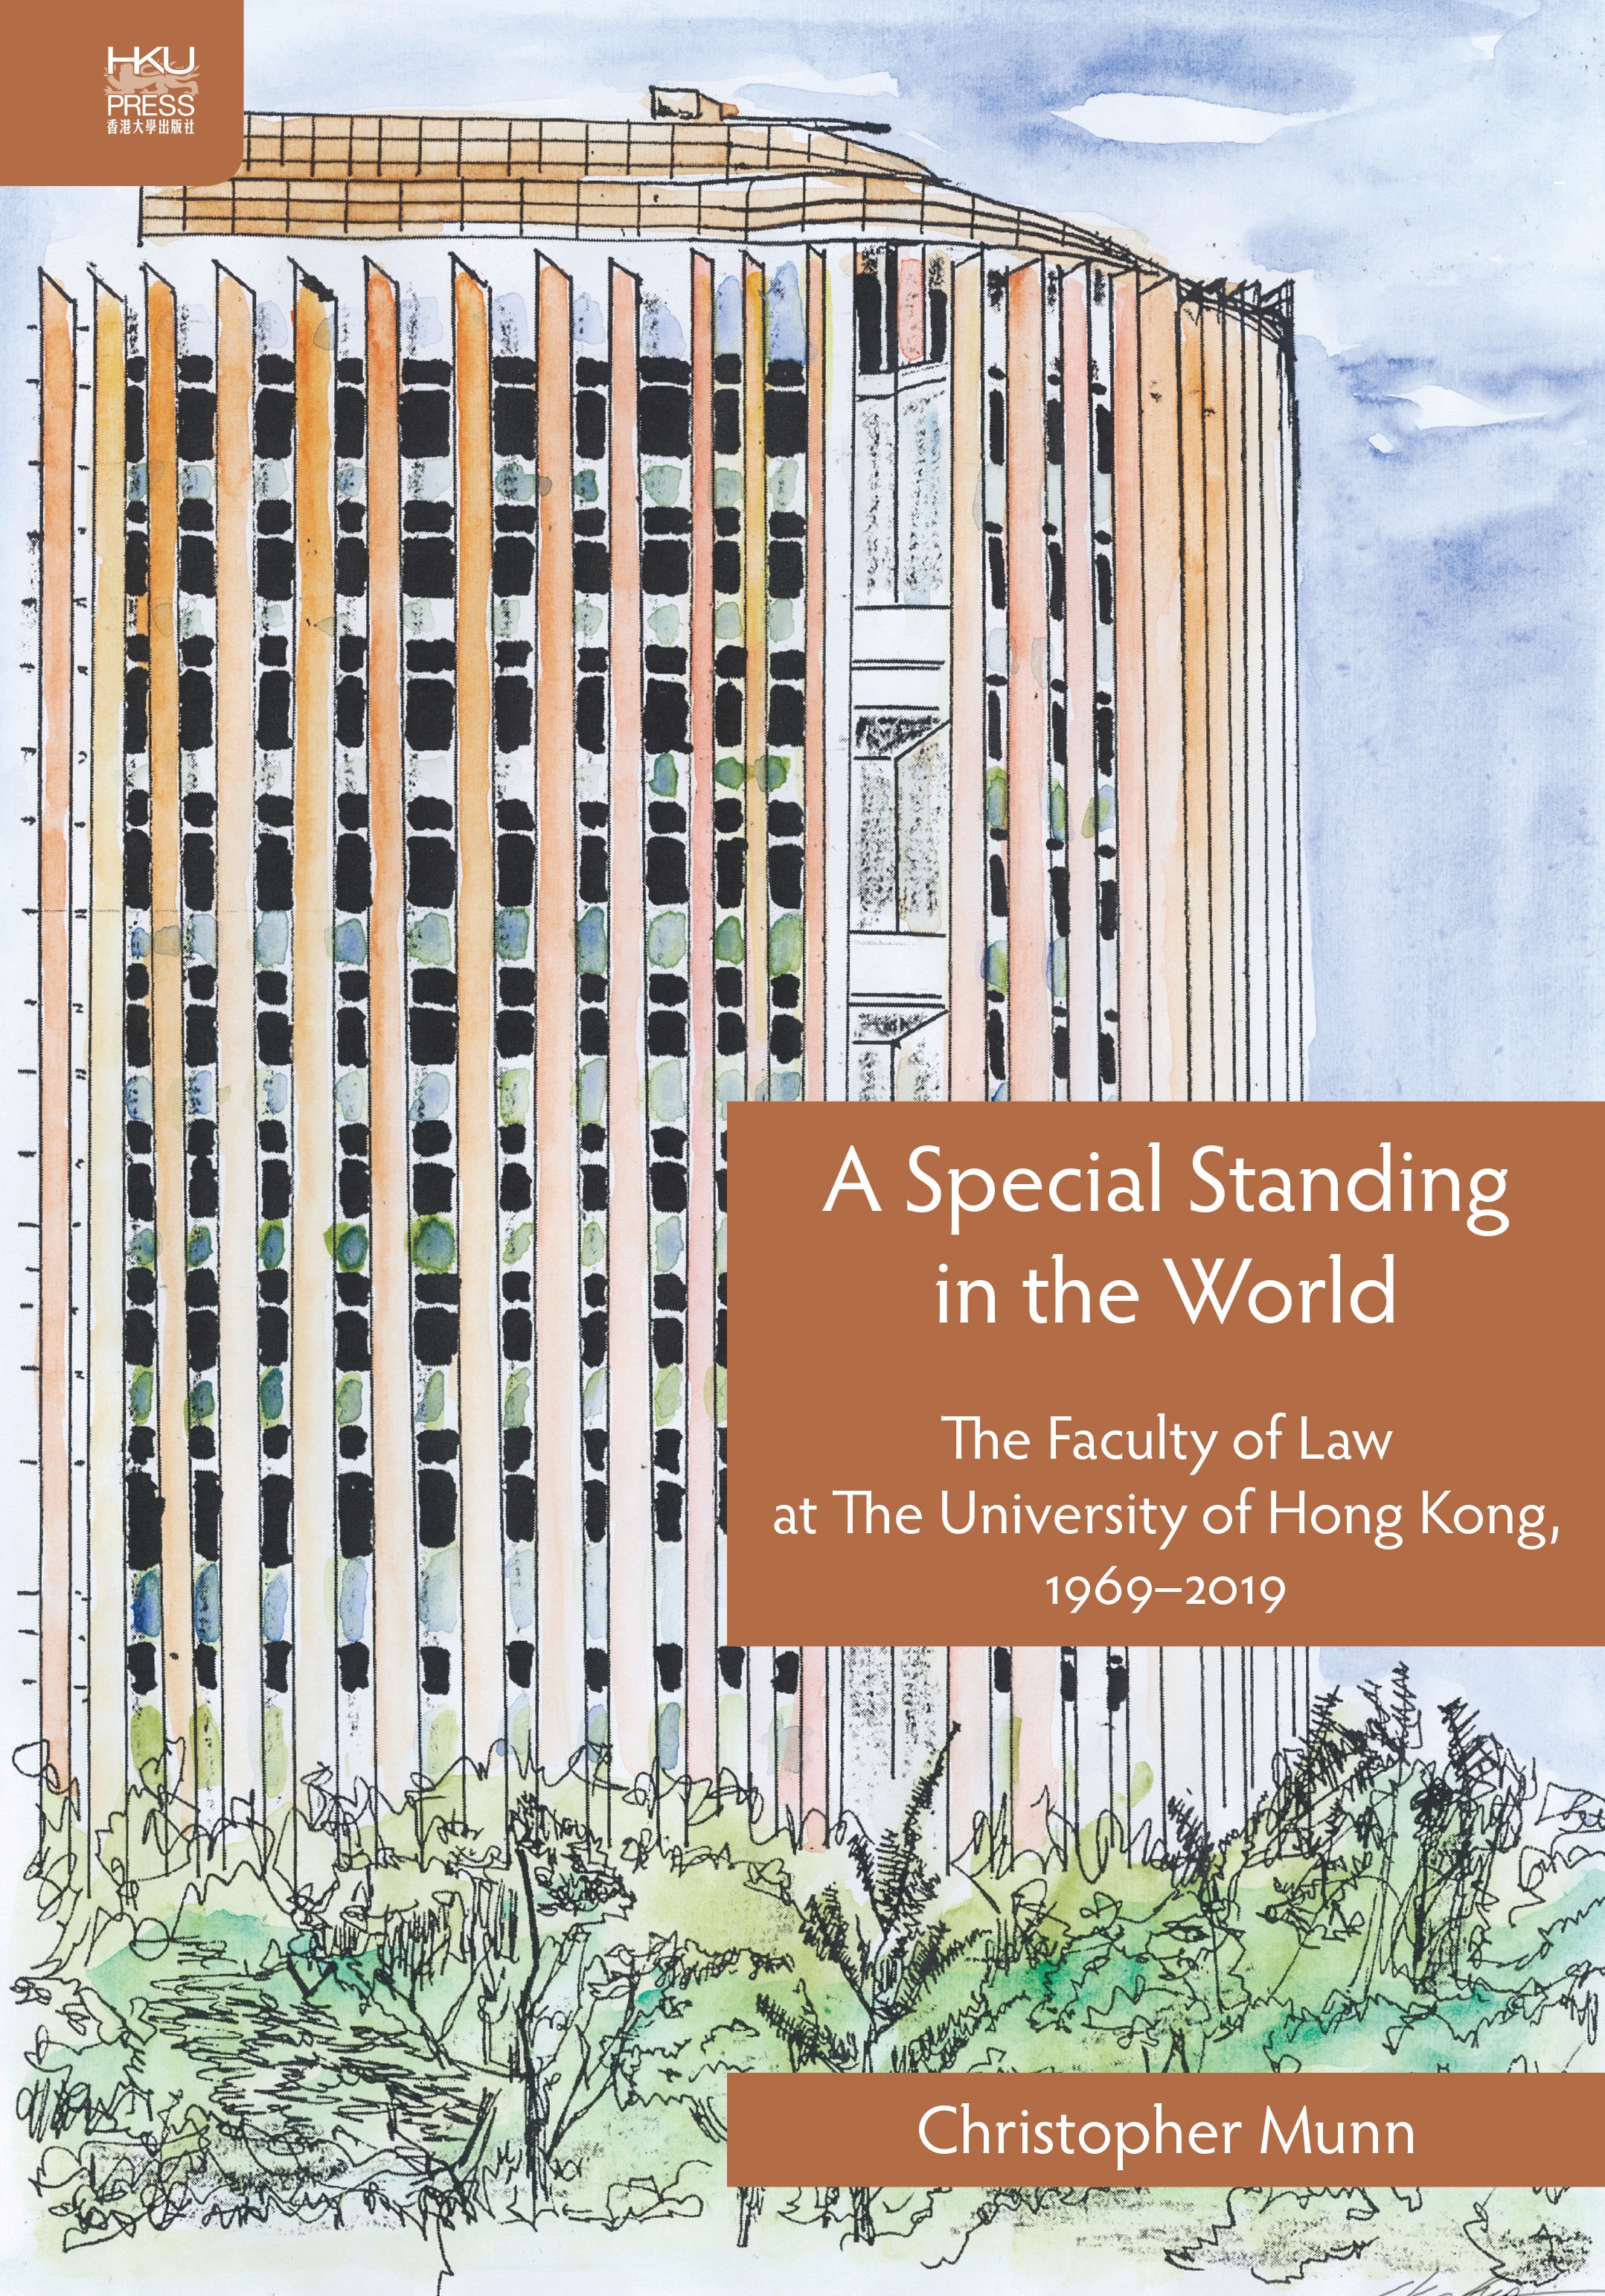 A Special Standing in the World, The Faculty of Law at The University of Hong Kong, 1969-2019 by Christopher Munn